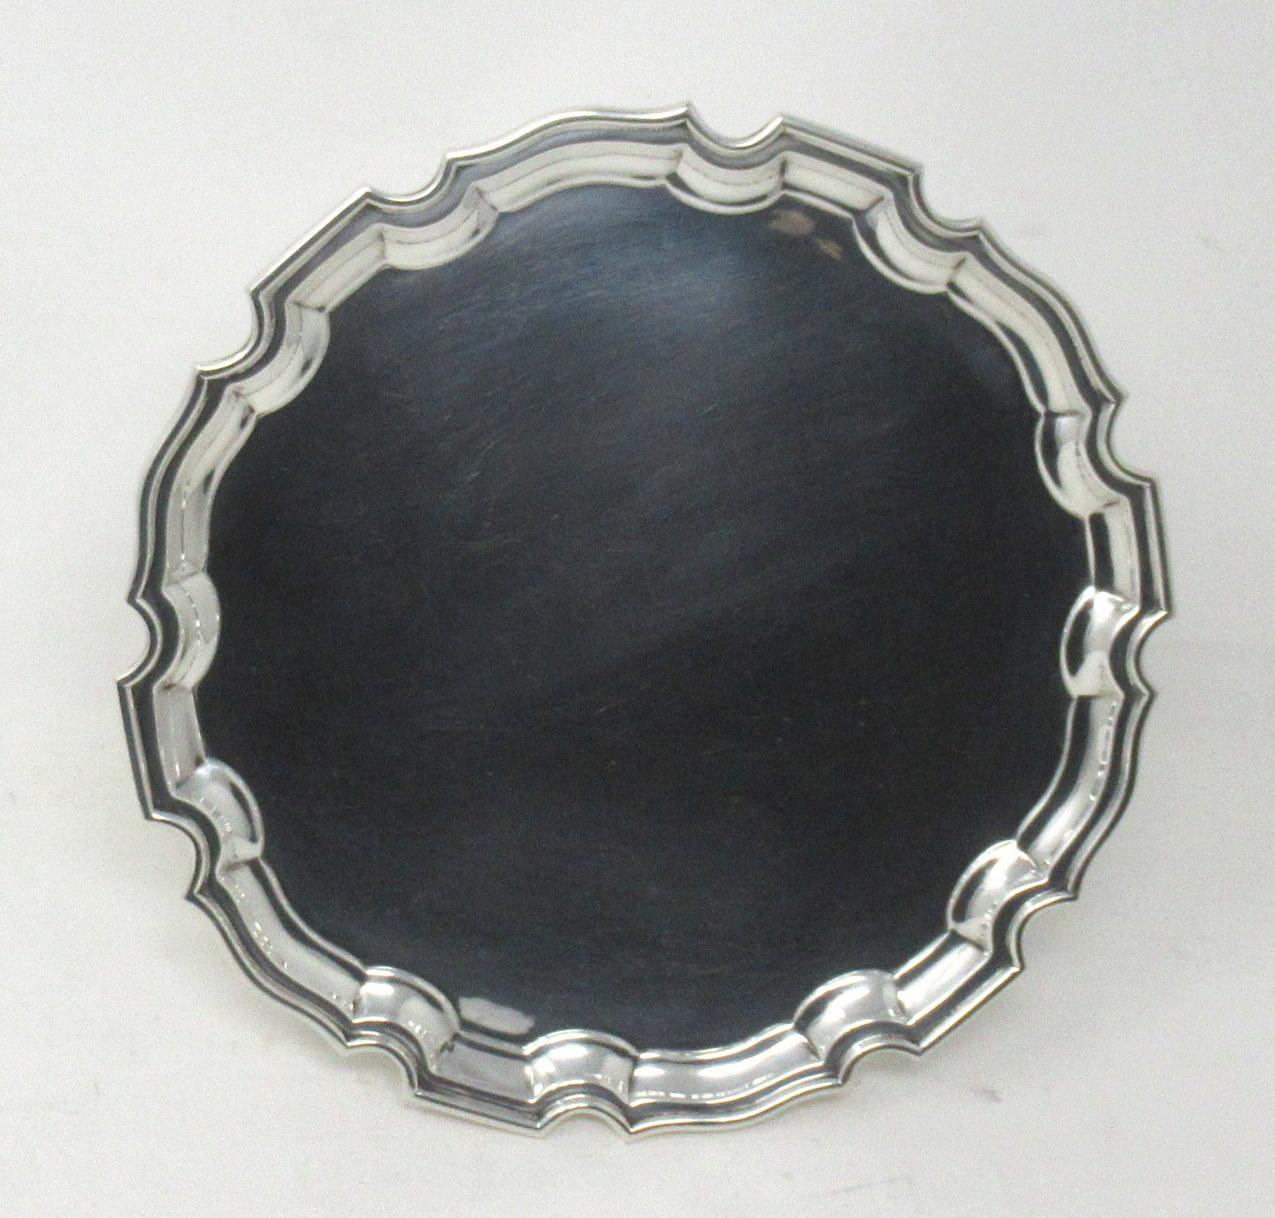 A superb example of a mid century heavy gauge sterling silver flat card tray of outstanding quality and condition for such an early silver item. 

The shaped circular form with stylish raised piecrust rim detailing, edged with a flat rim edge.